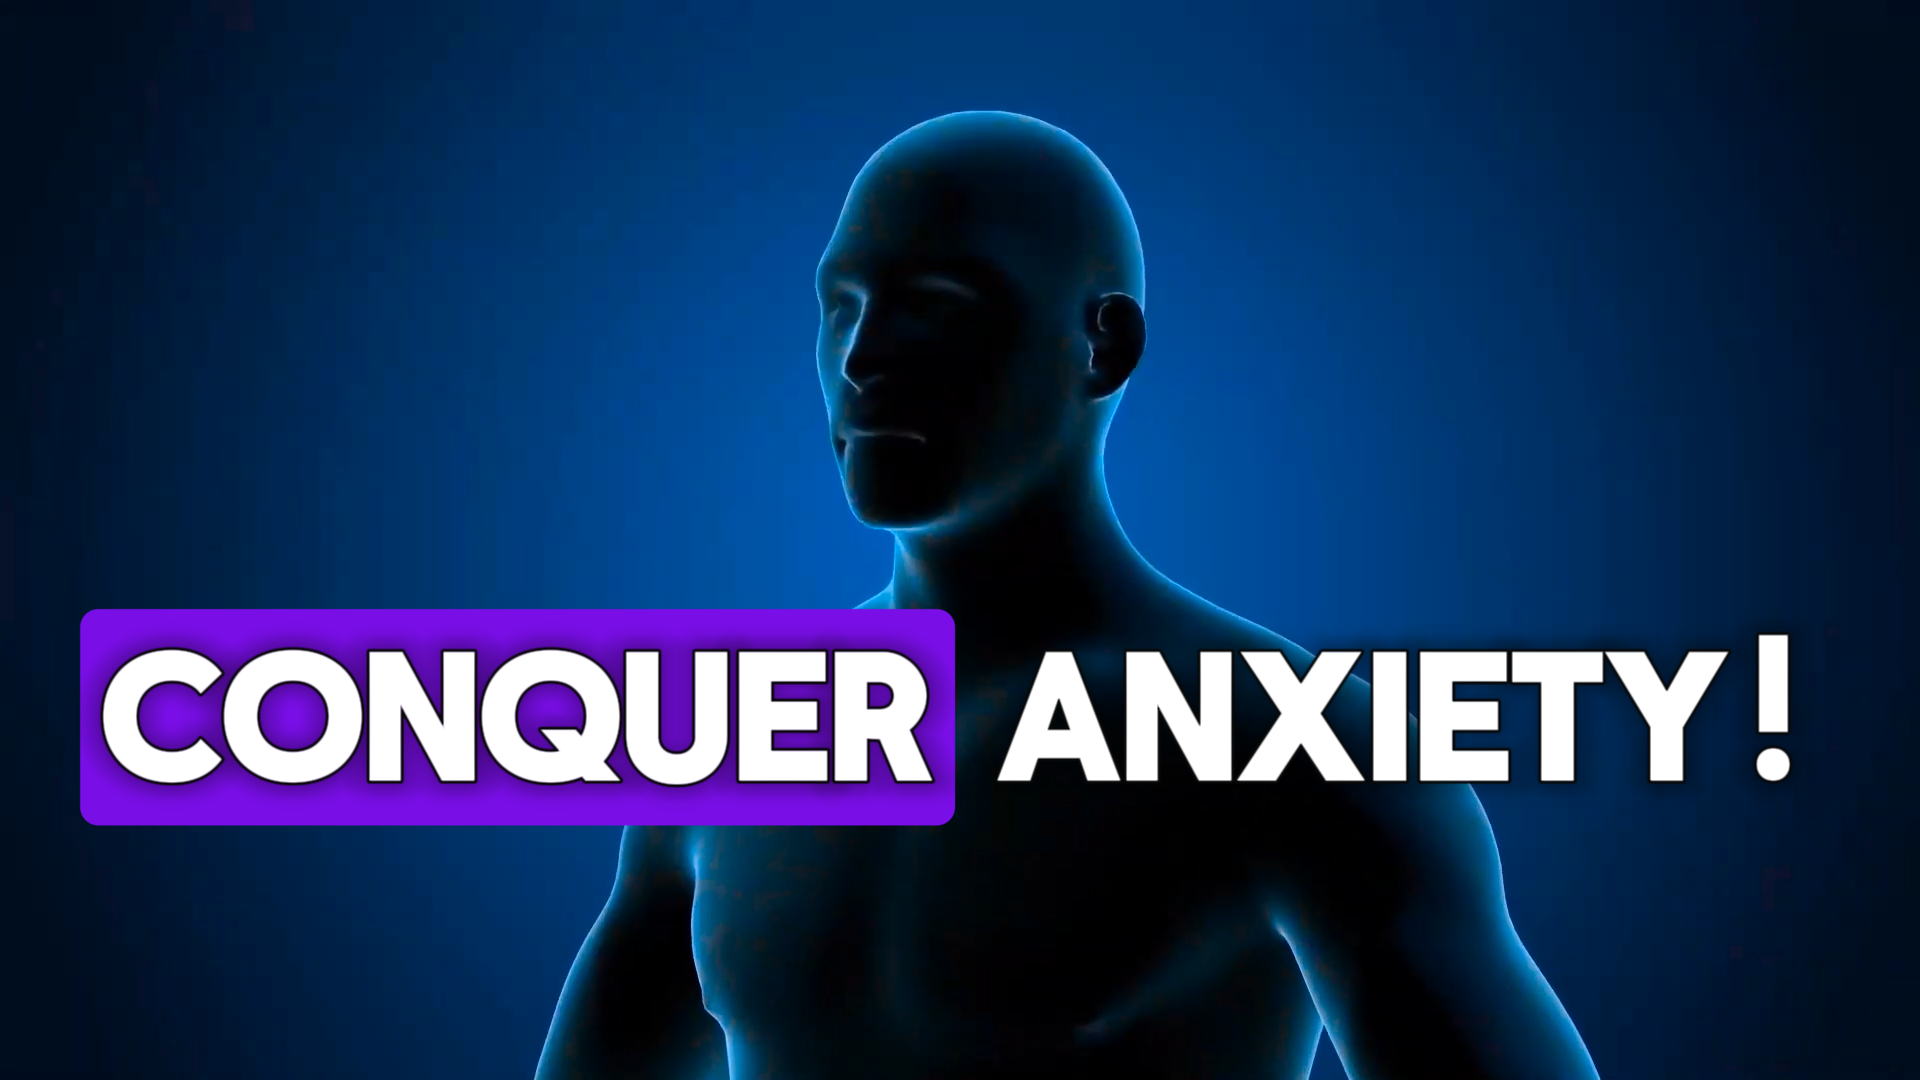 You Can Conquer Anxiety